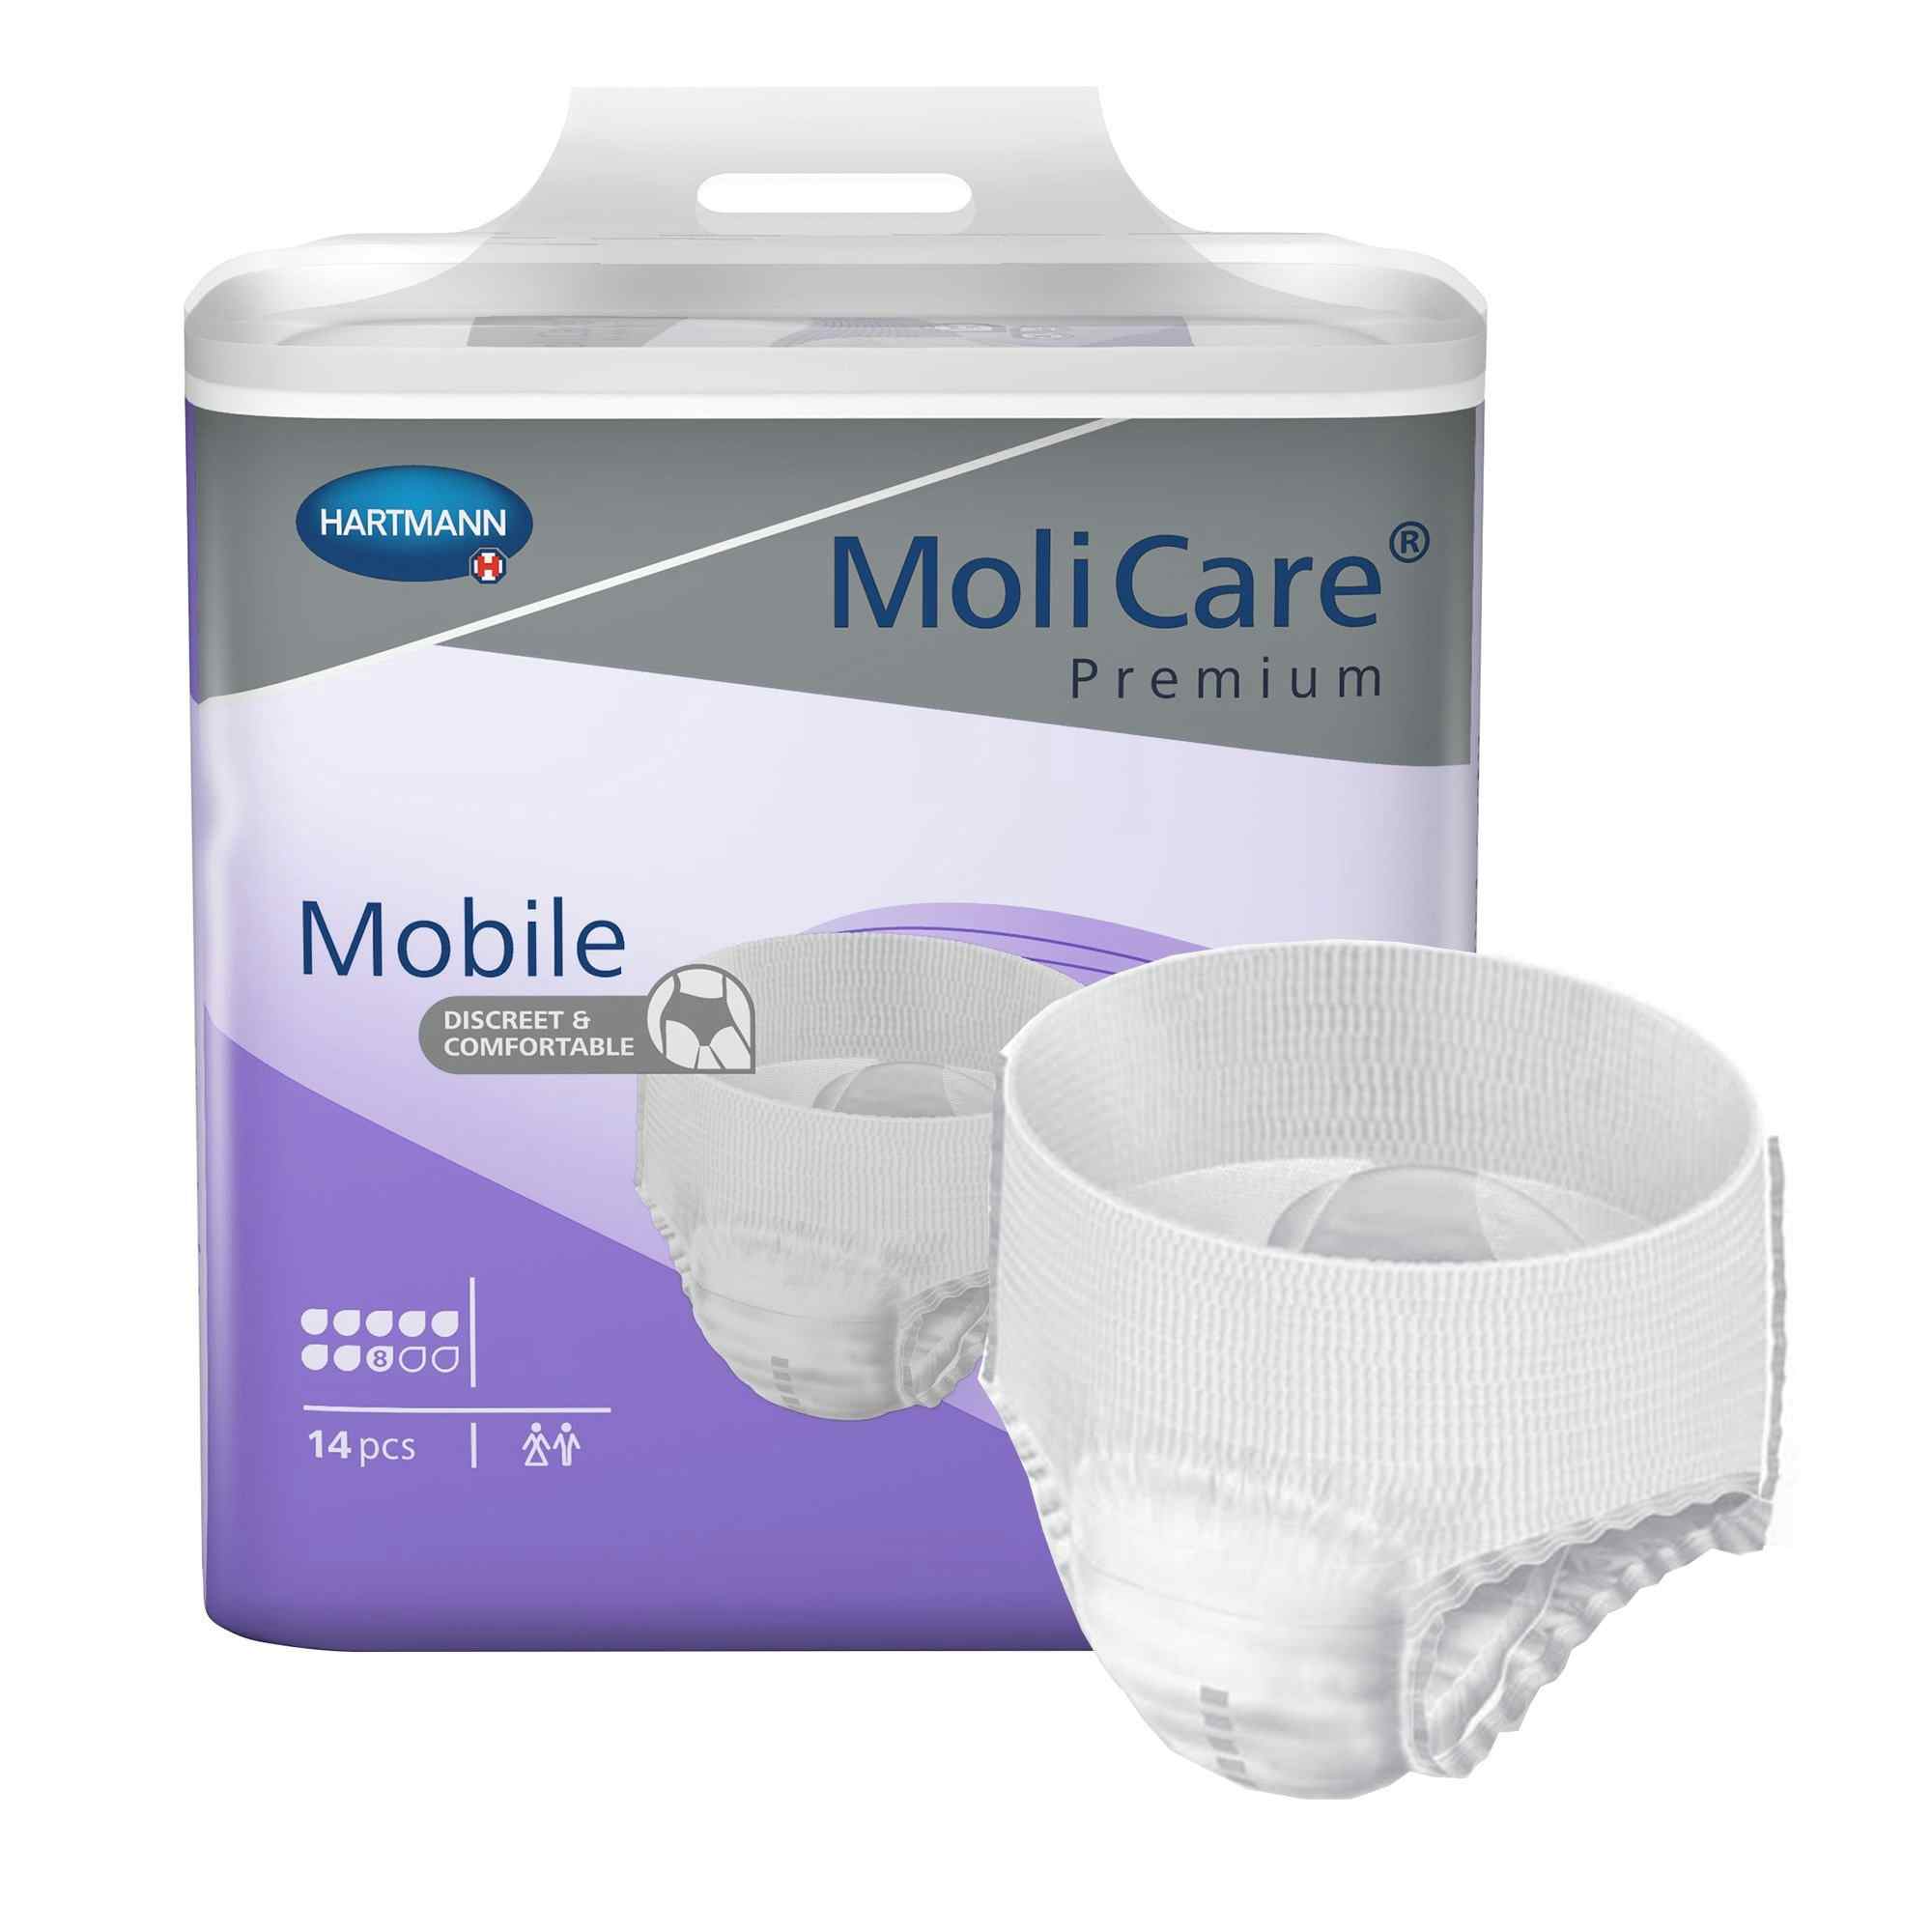 MoliCare Premium Mobile Pull-Up Underwear, 8 Drops Heavy Absorbency, 915871, Small (24-25") - Case of 56